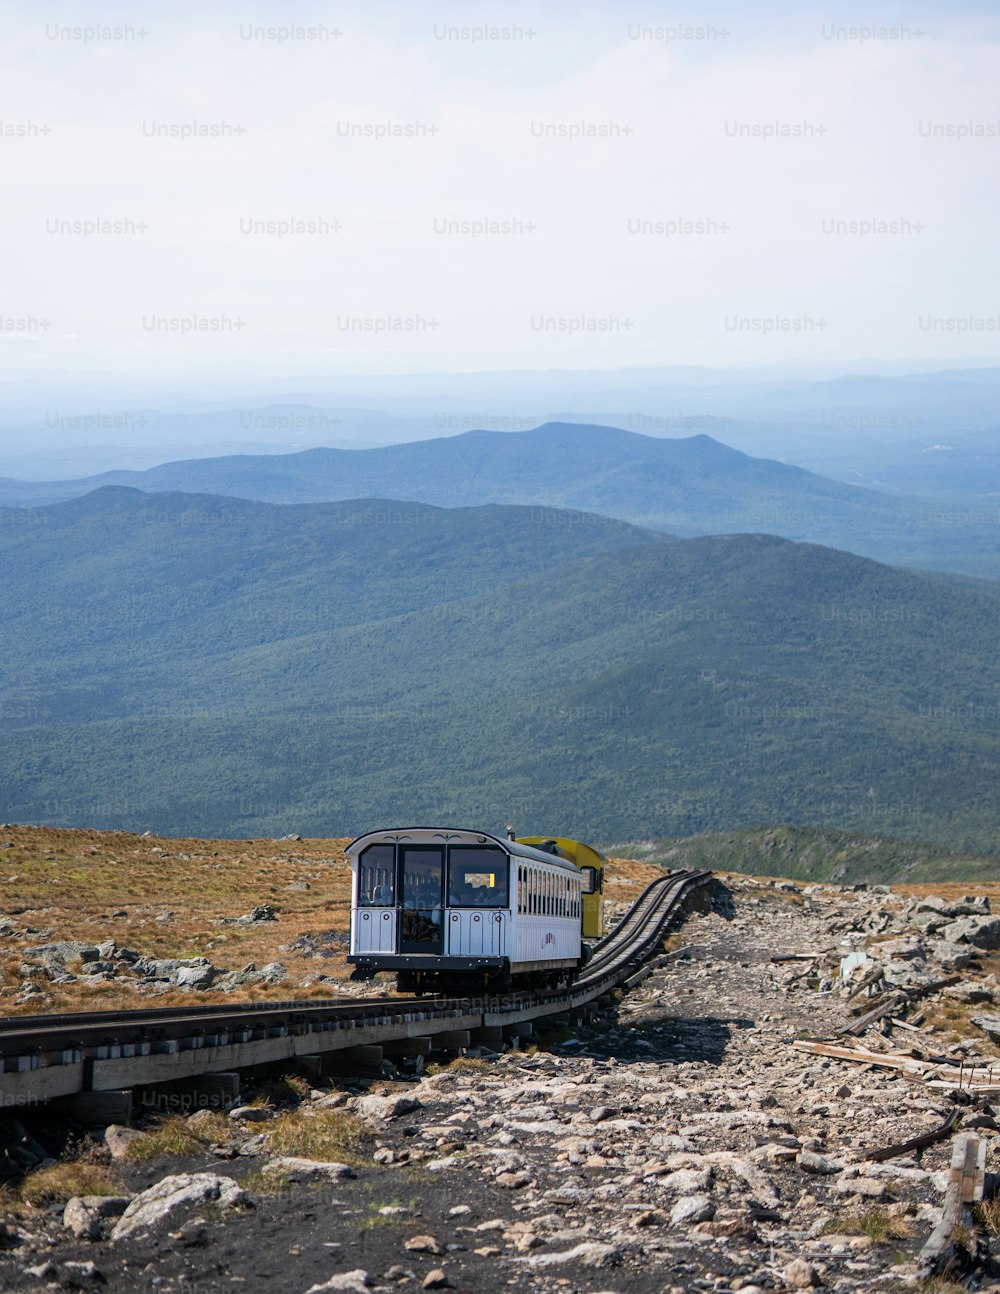 a train on a track with mountains in the background